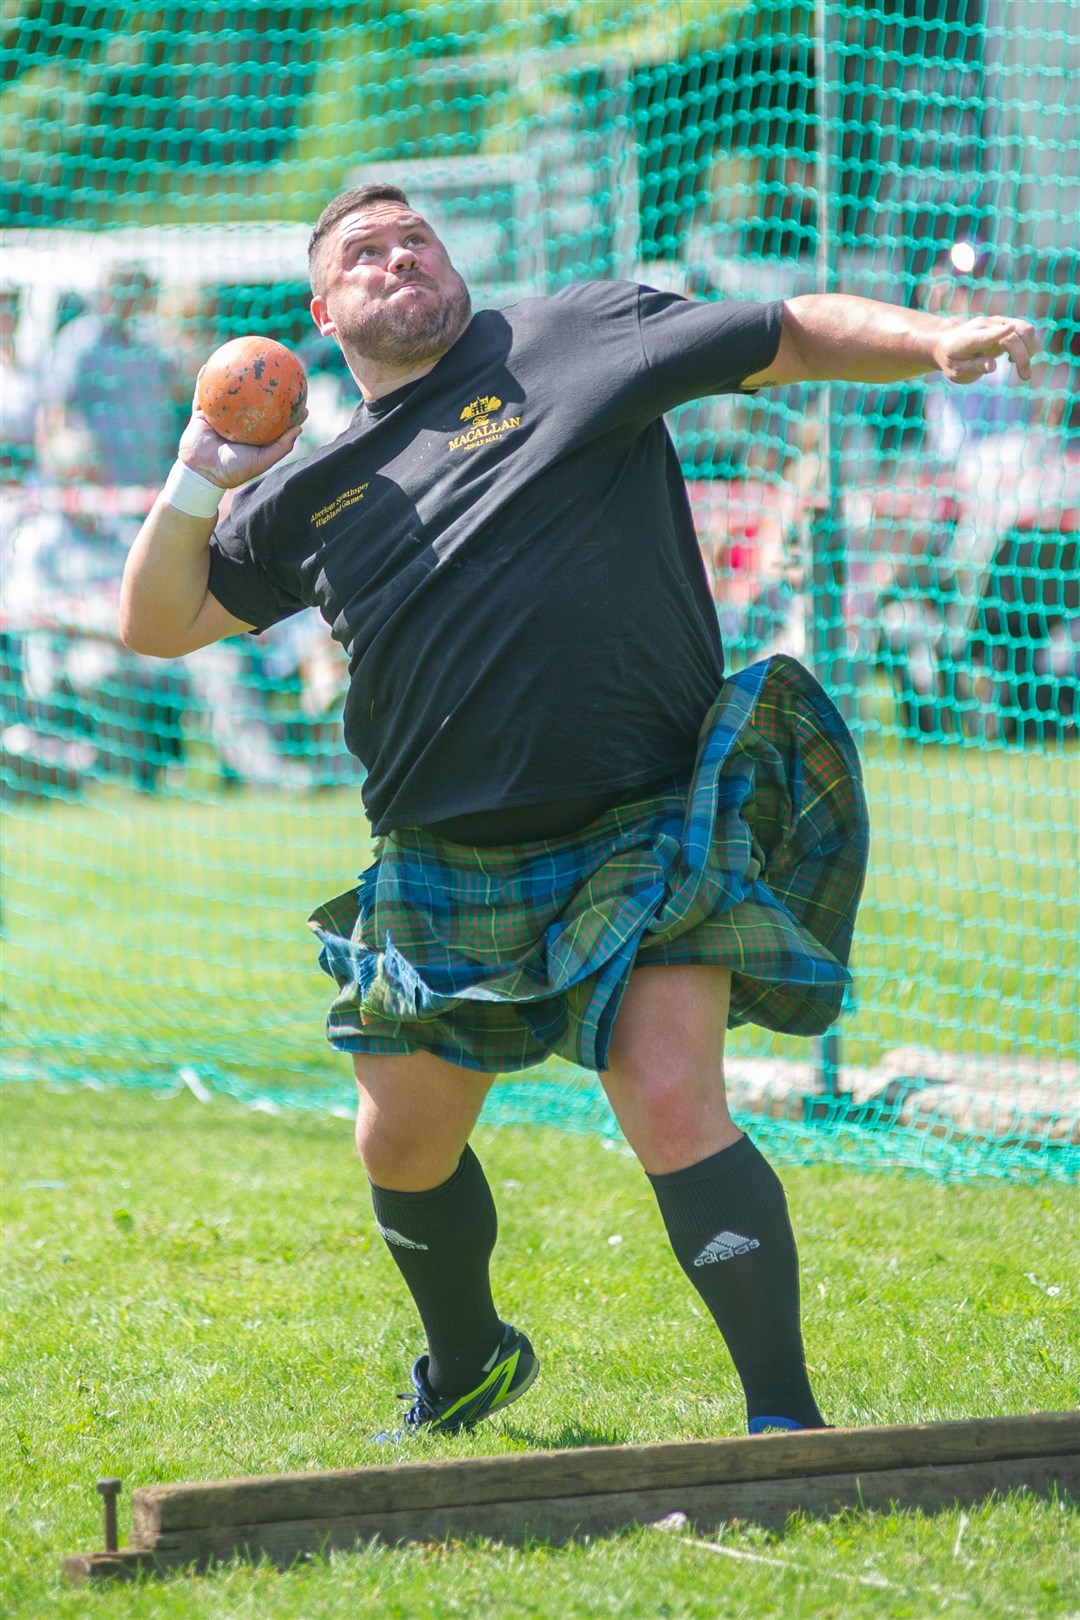 Throwing the 22lb shot is Sinclair Patience in the heavyweight category...The 76th Aberlour Stathspey Highland Games - 3rd August 2019. ..Picture: Daniel Forsyth. Image No.044579.